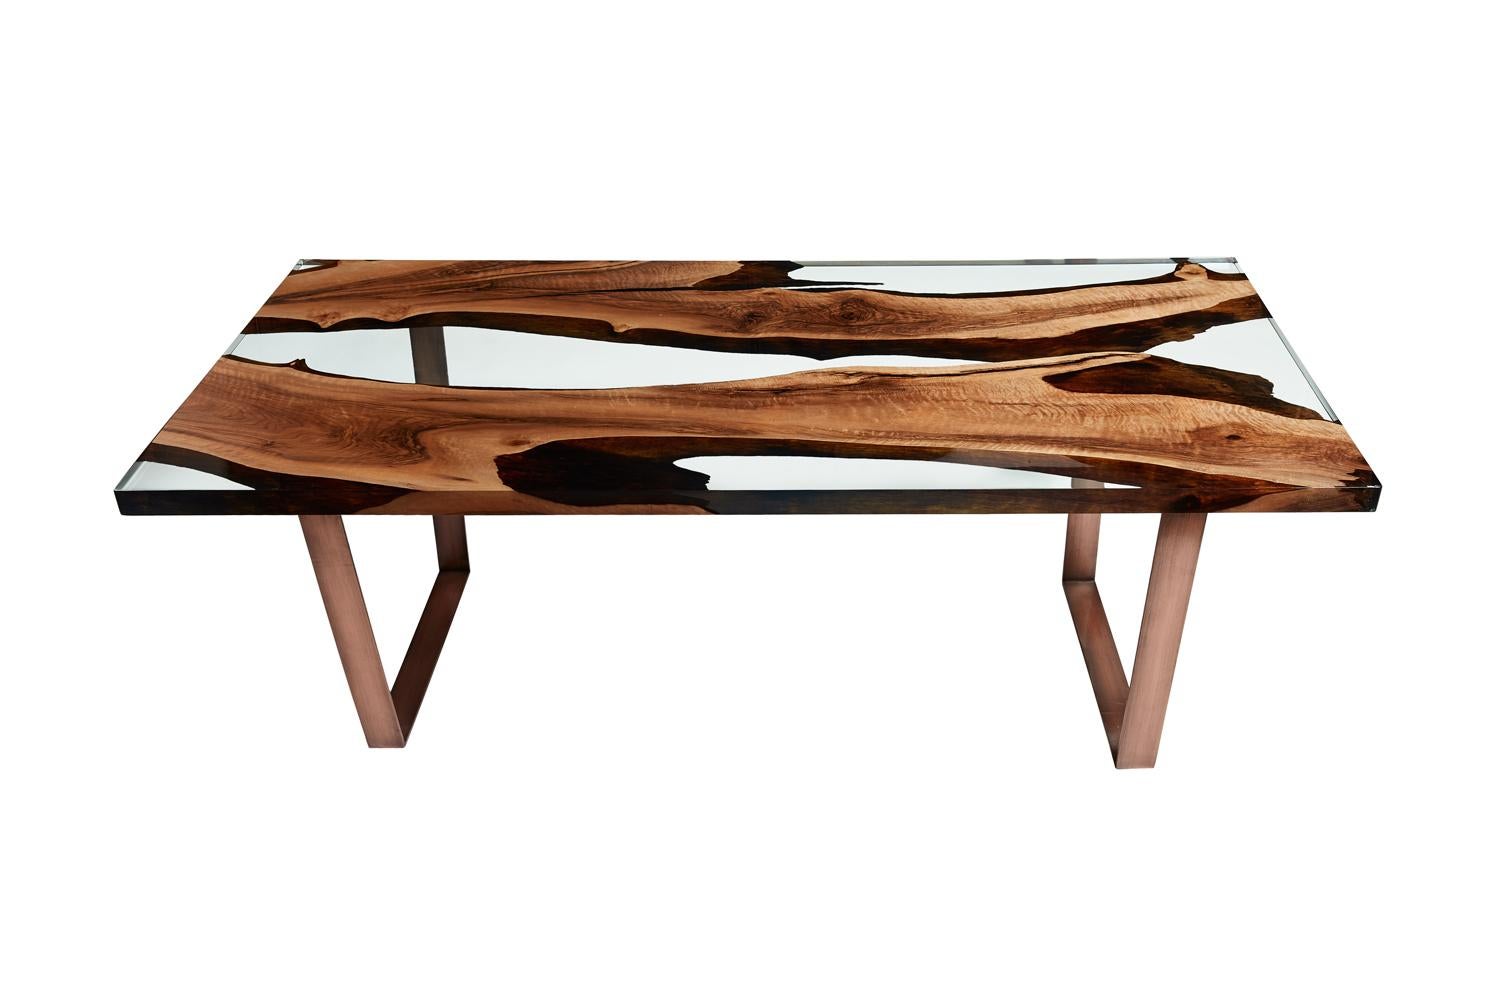 The ‘Primitive 220 Resin Dining Table’ was made in Ankara, Turkey with walnut wood. The wood is kilned and dried prior to being filled with high quality resin and has cast iron geometric legs. Its edges are straight cut to show the depth of the wood